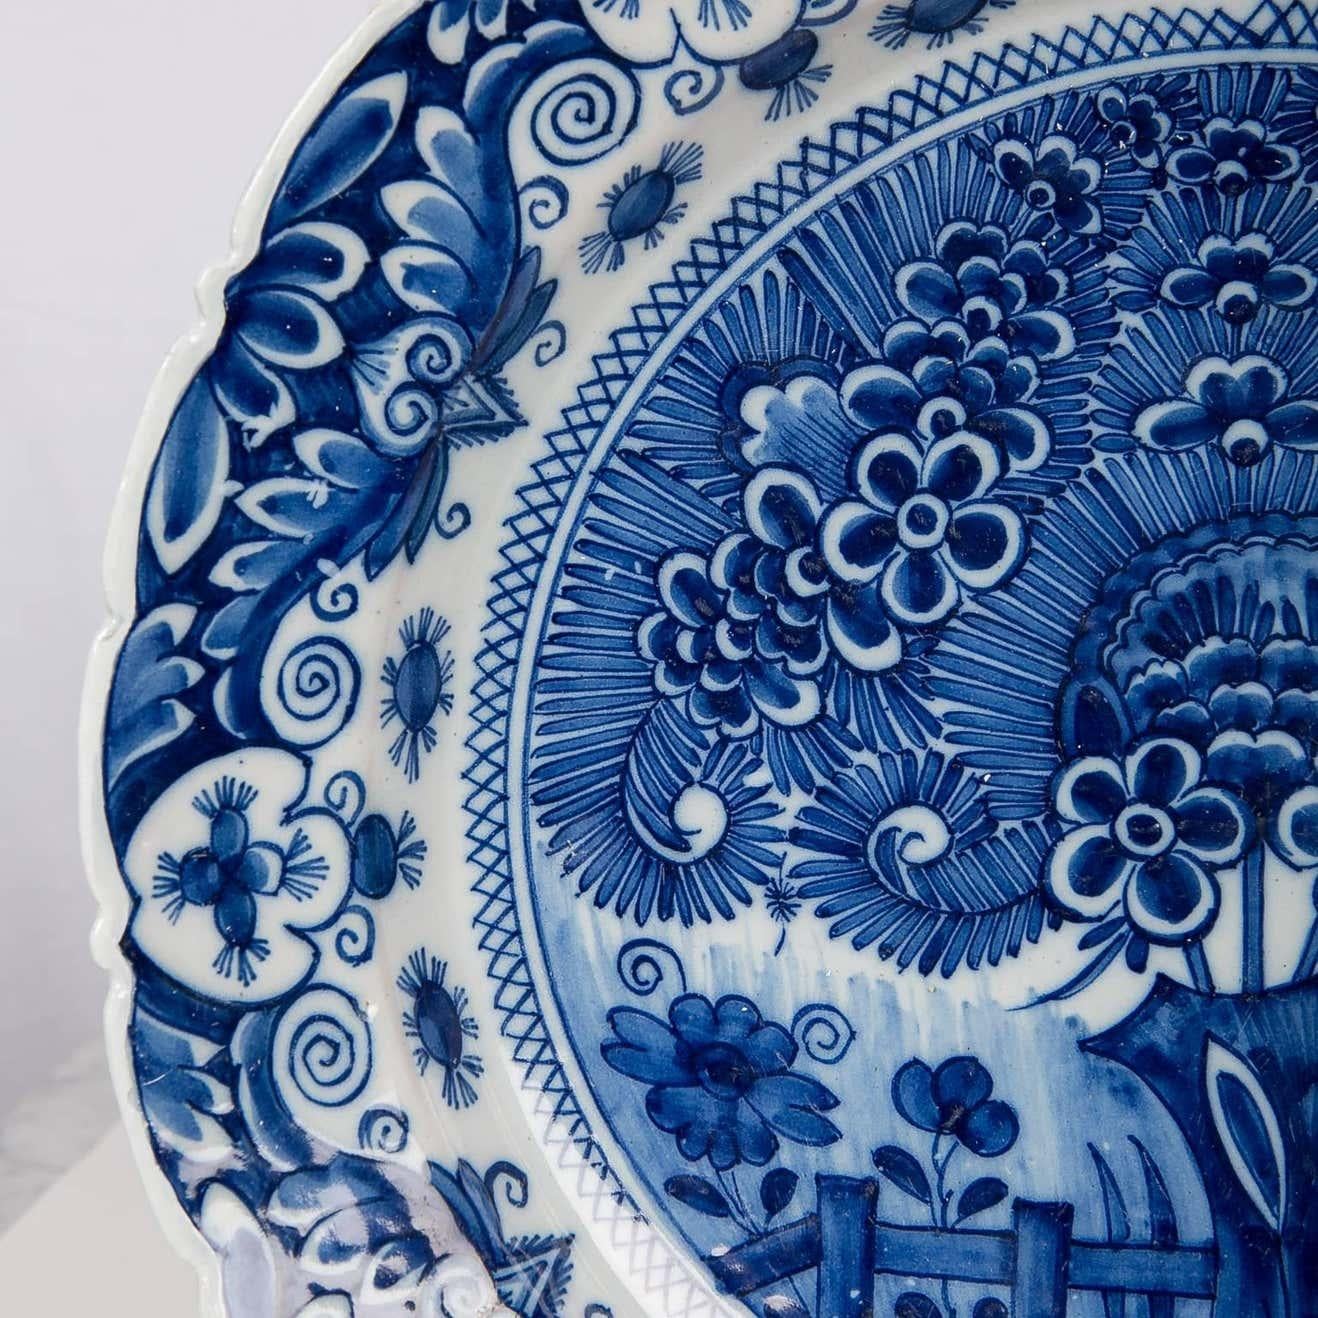 Why We Love It: The deep cobalt blue is fabulous!
This group makes a true blue statement.
Provenance: An identical Delft charger is in the Philadelphia Museum of Art collection. For an image of this identical plate and a discussion of its origins,